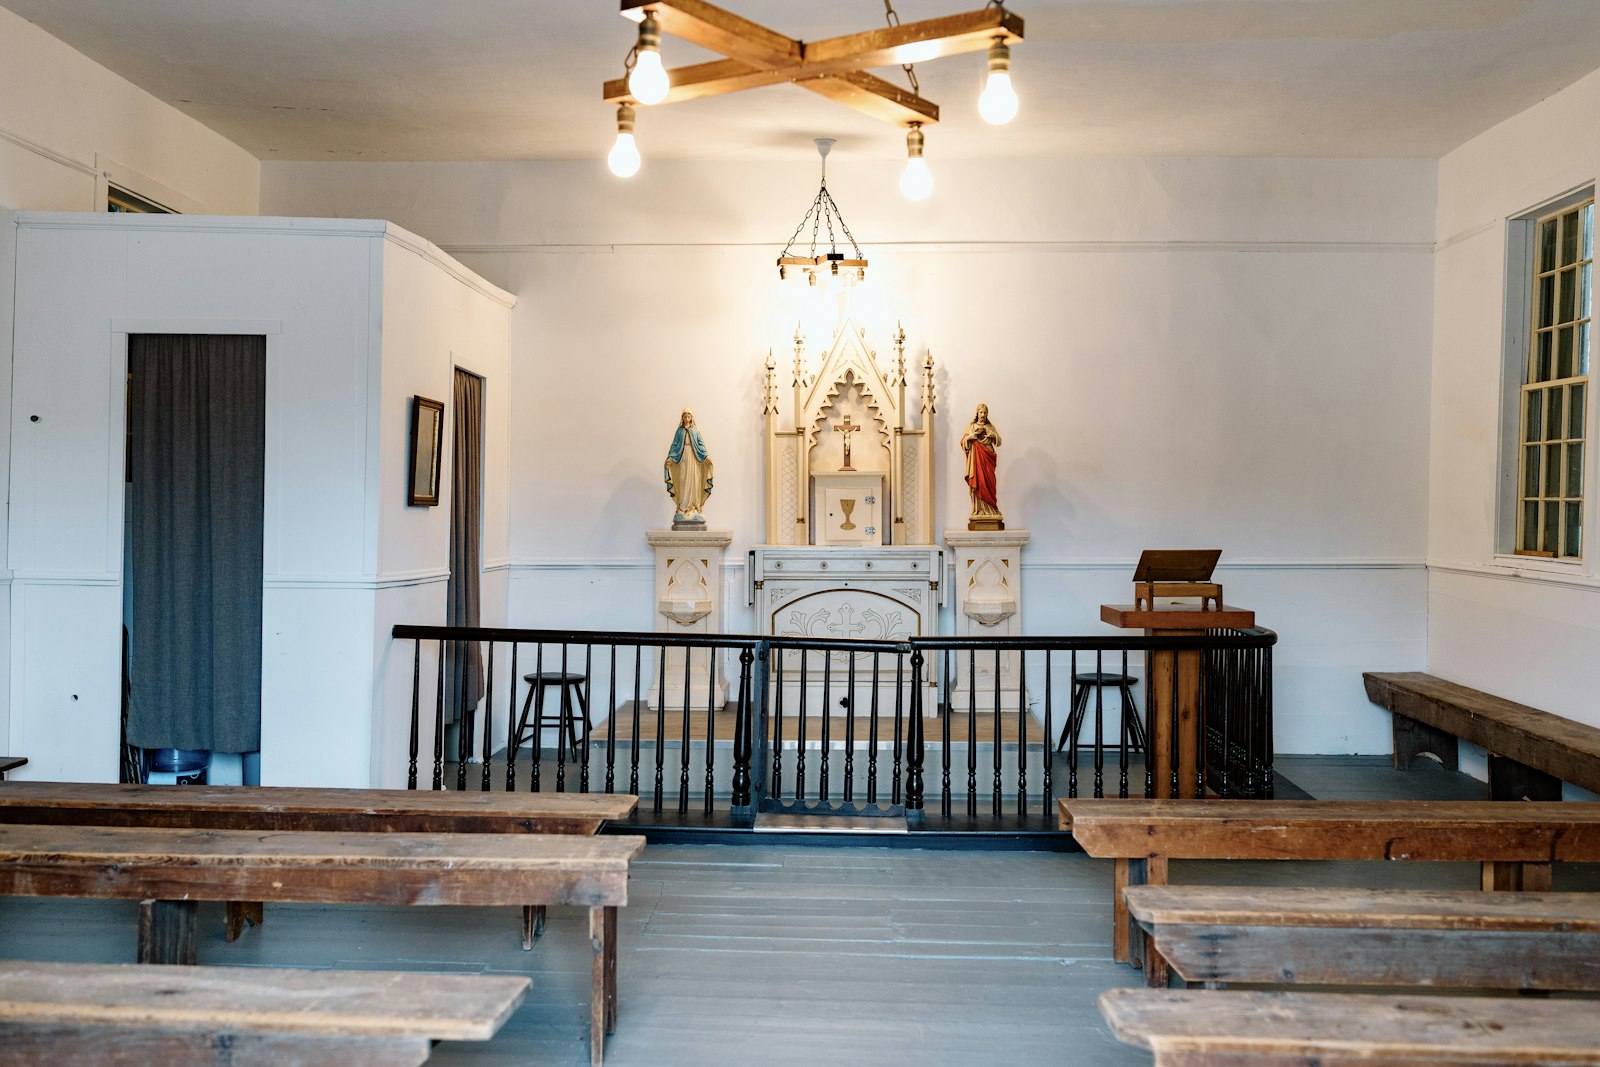 The chapel's original baptismal font, Stations of the Cross and confessional still stand, as well as small wooden pews built to serve the Irish farming families who would attend Mass there.